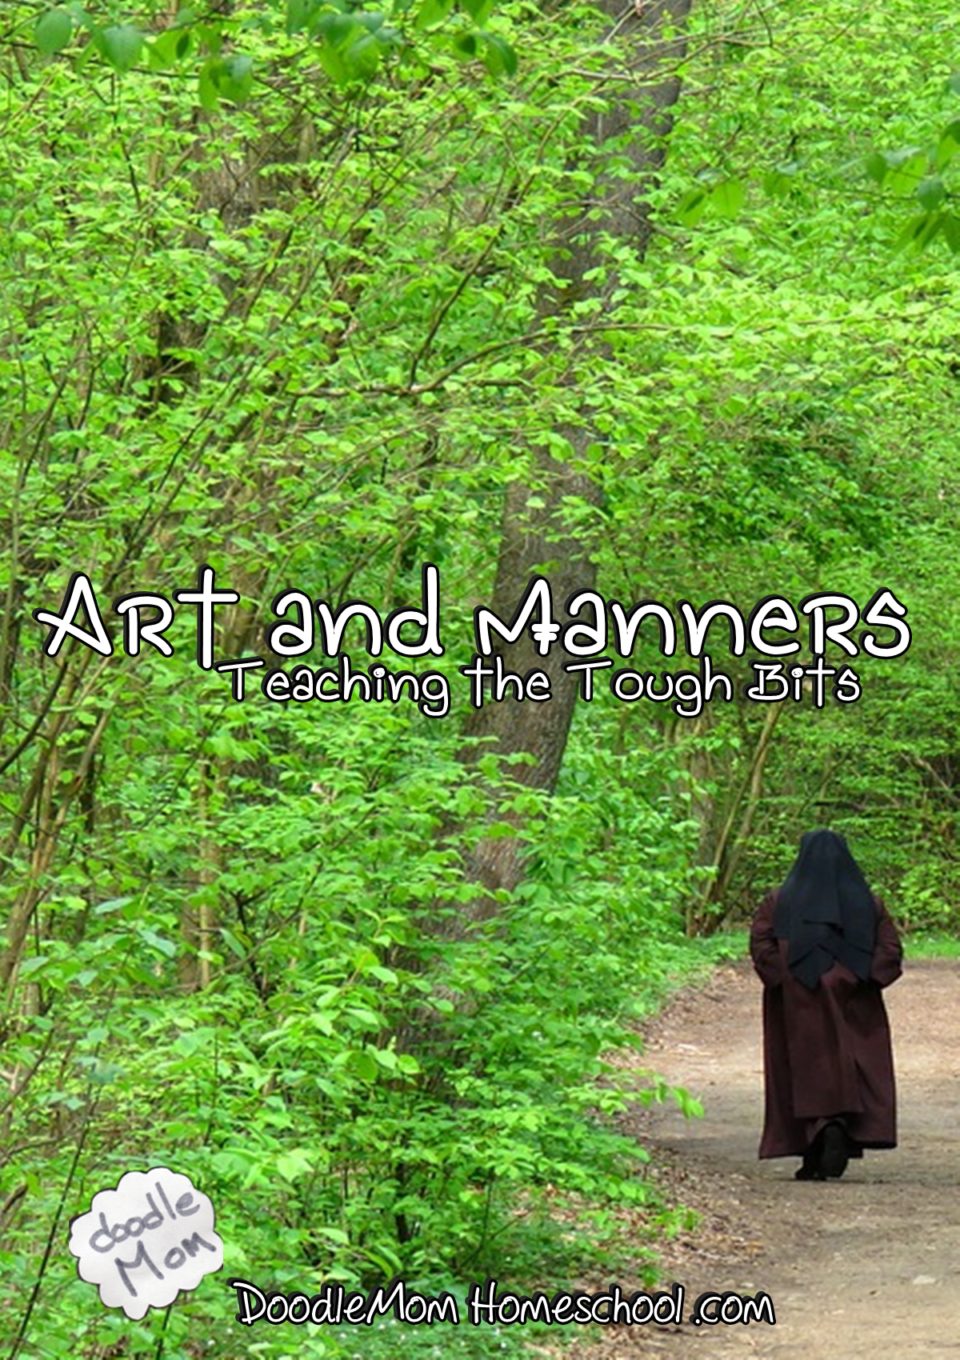 Art and Manners